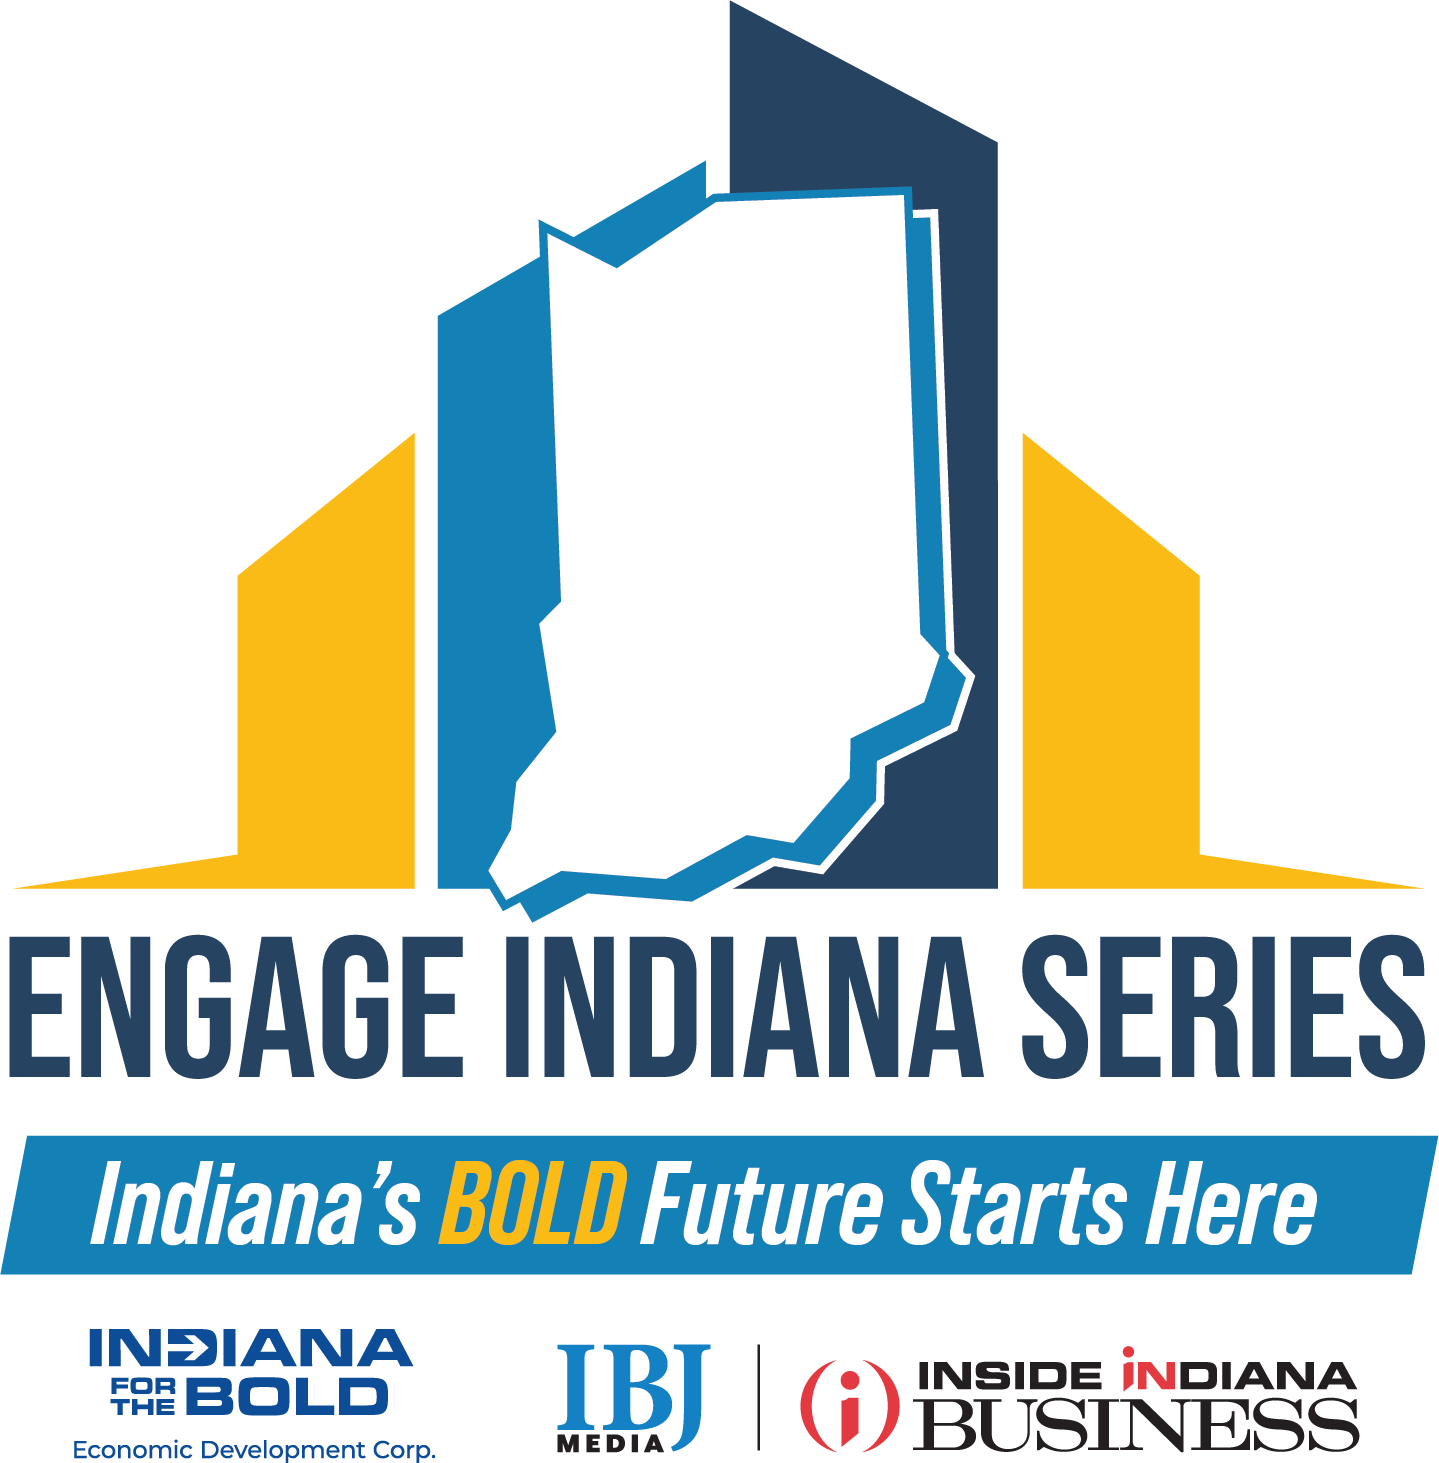 Engage Indiana Series, Indiana's Bold Future Starts Here. Indiana for the Bold, Economic Development Corp, IBJ Media, Inside Indiana Business.